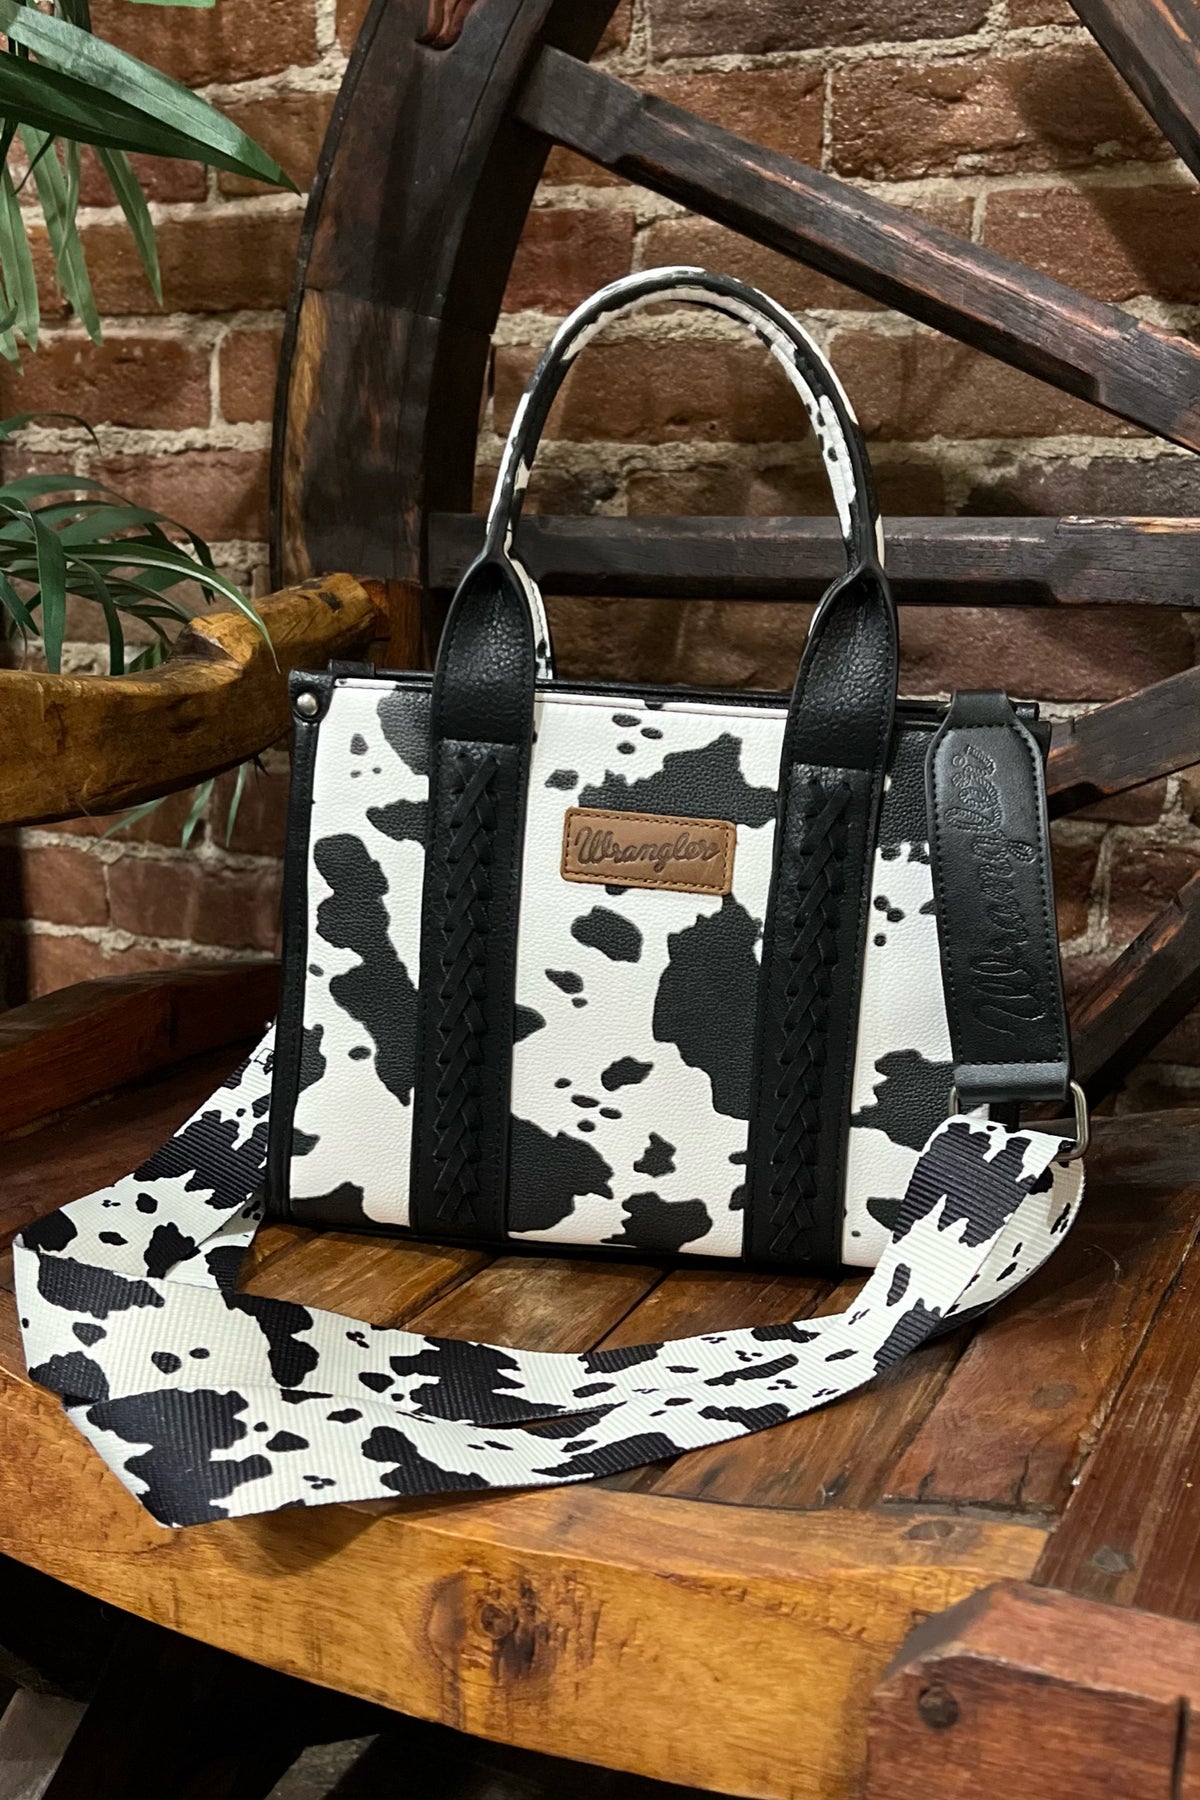 Wrangler Full Black Cow Print Concealed Carry Crossbody Tote-Handbags & Accessories-Montana West-Gallop 'n Glitz- Women's Western Wear Boutique, Located in Grants Pass, Oregon